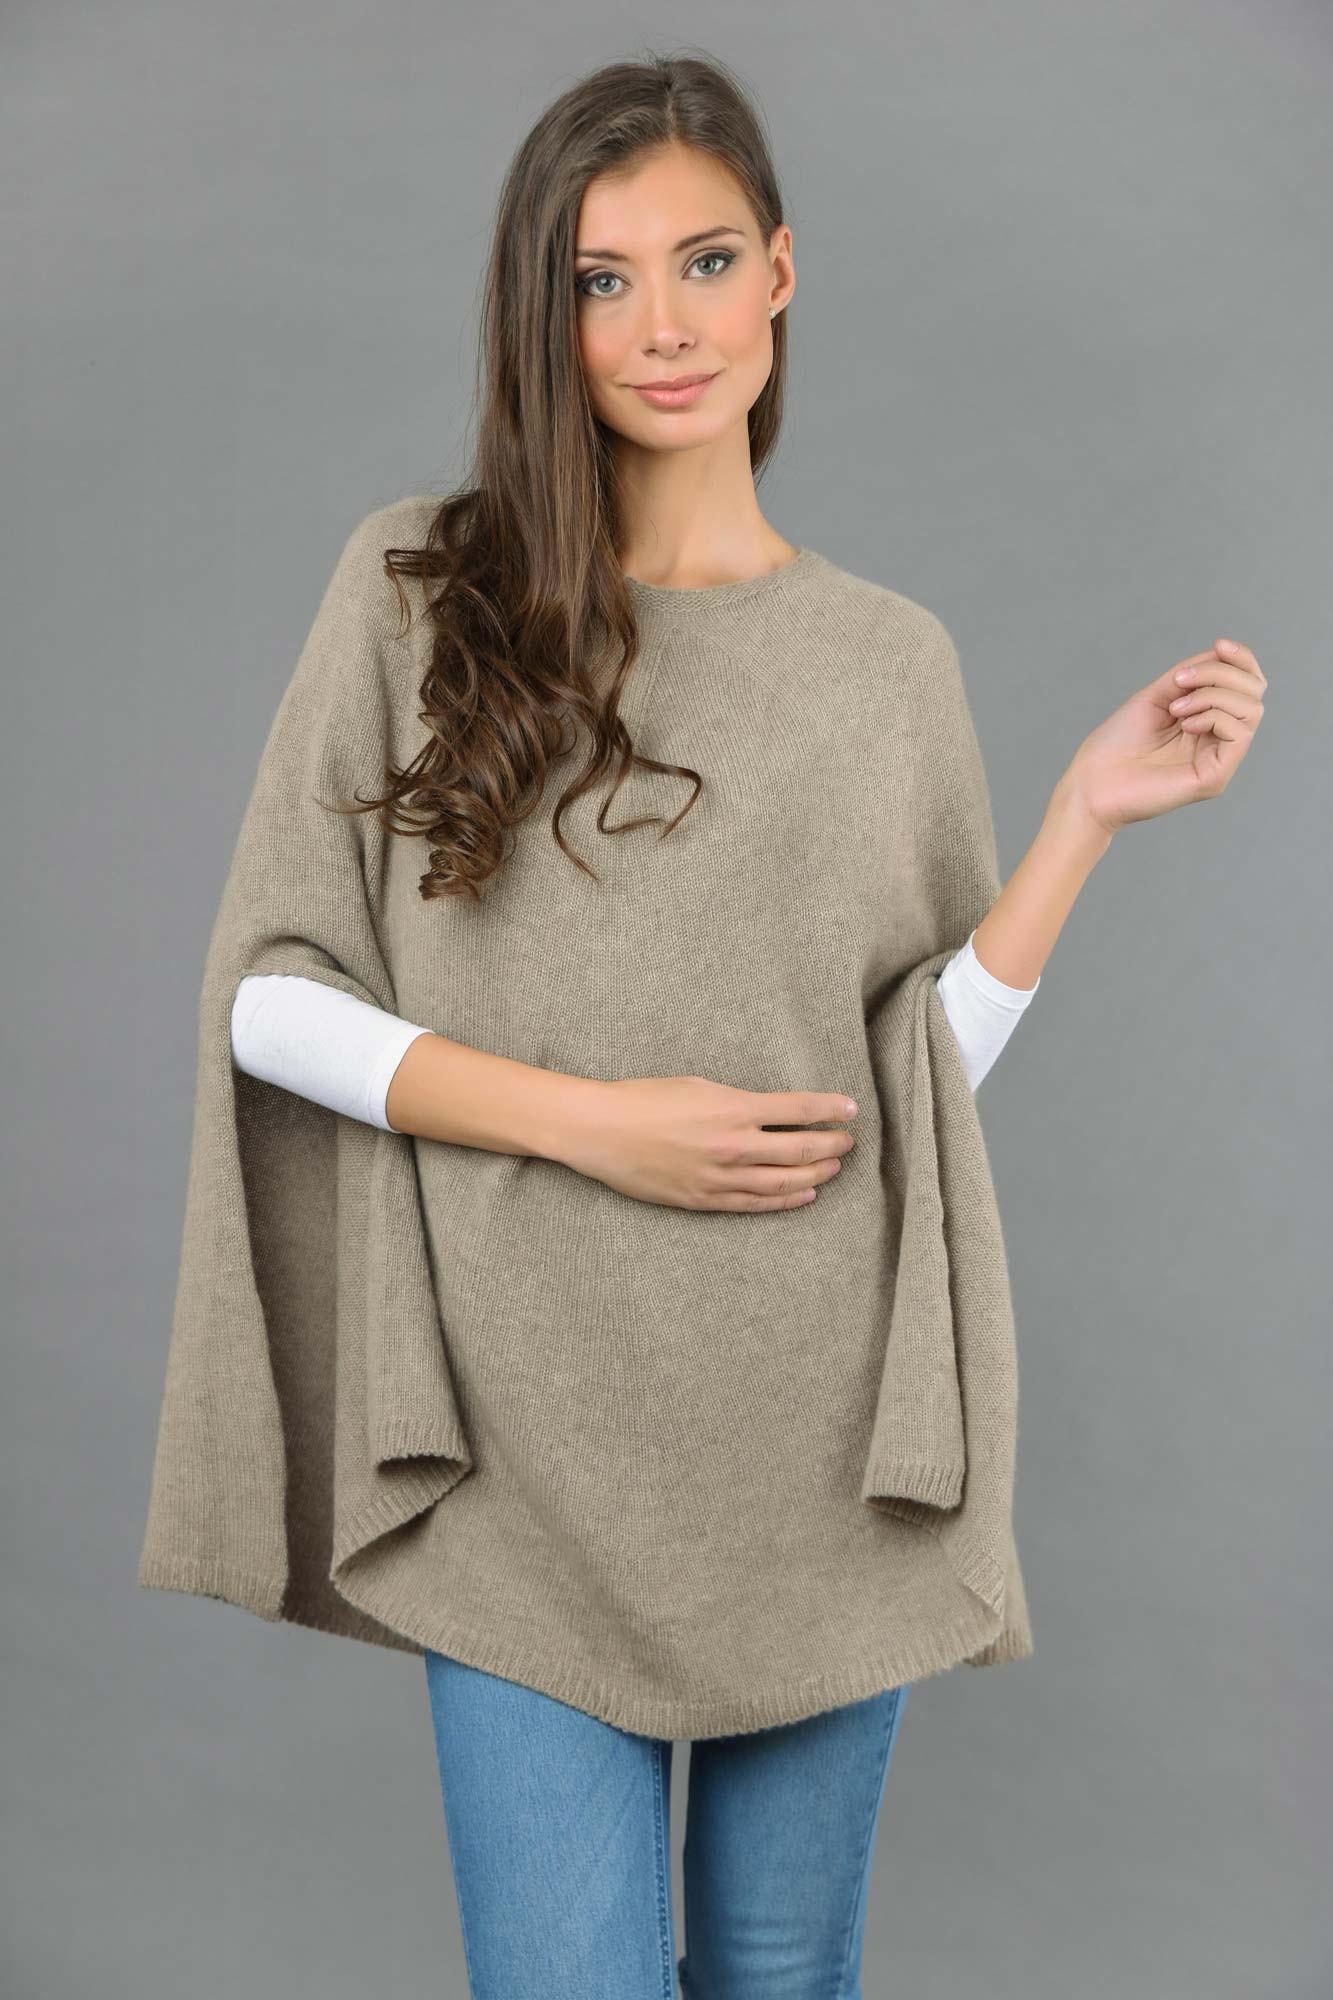 explosión Minero Araña Pure Cashmere Poncho Cape, Plain Knitted in Camel brown | Italy in Cashmere  US